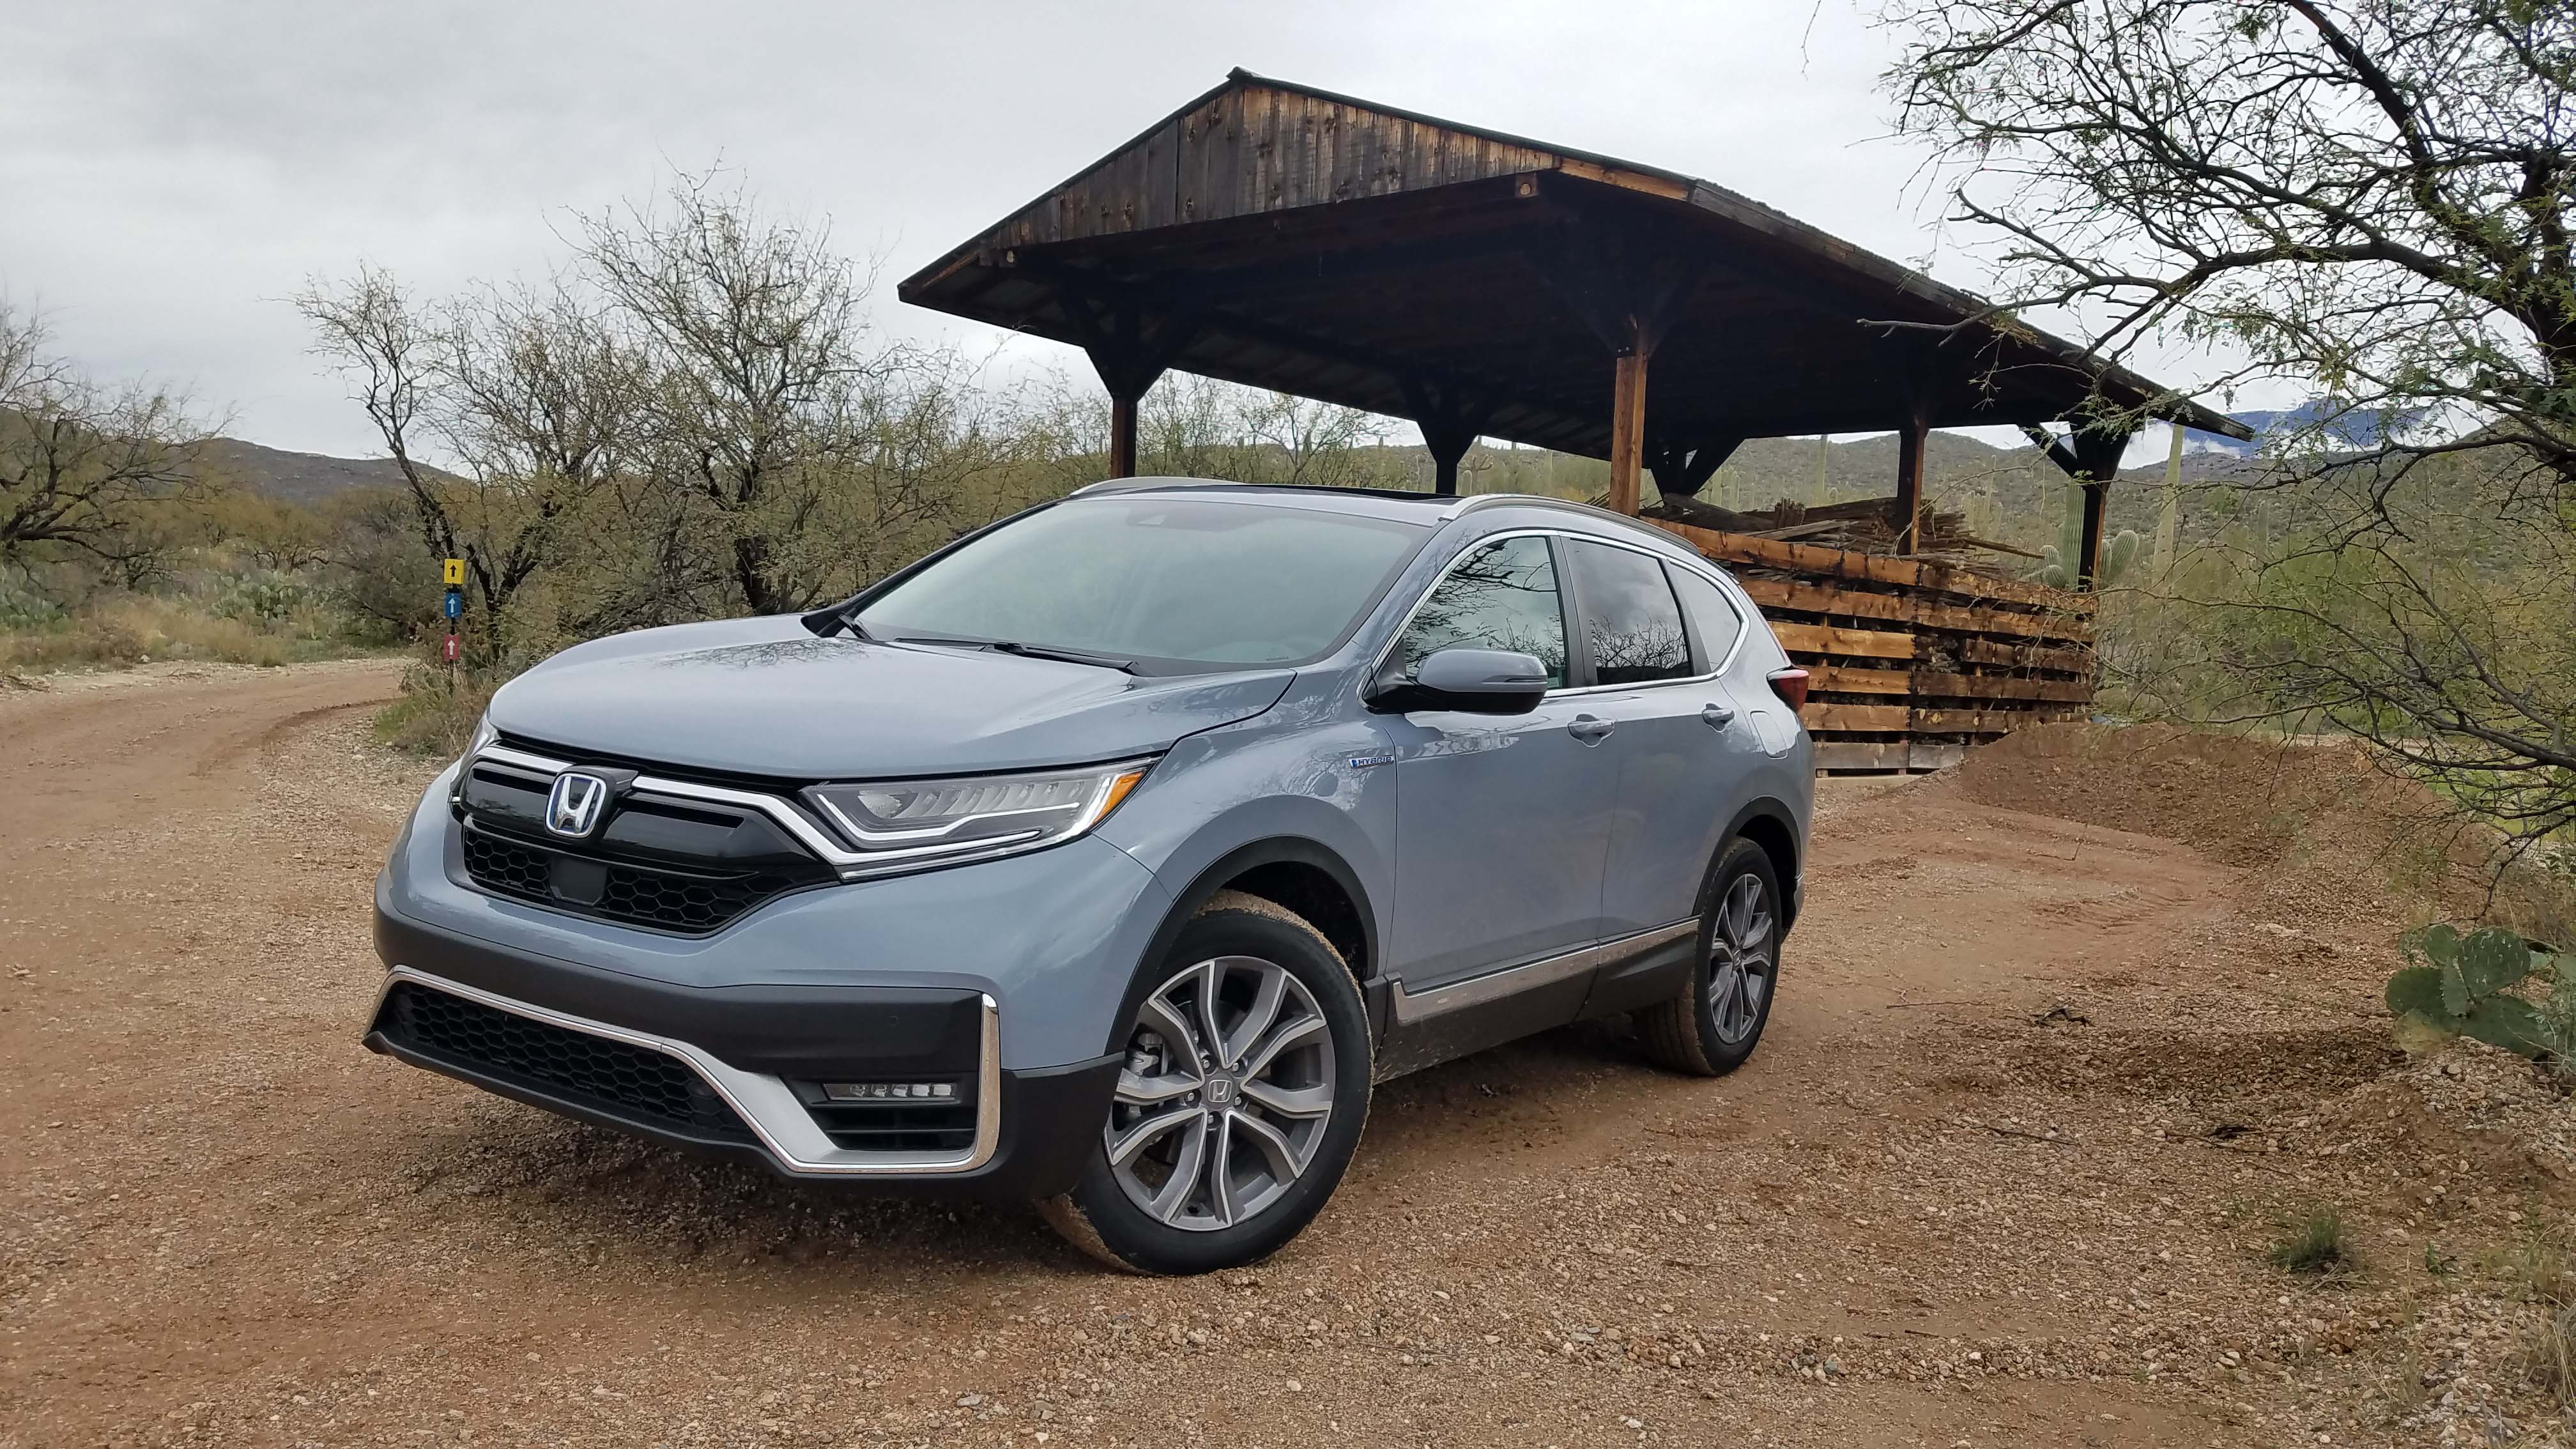 New for 2020, the Honda CR-V Hybrid is the best performing CR-V with 212 horsepower and excellent torque.